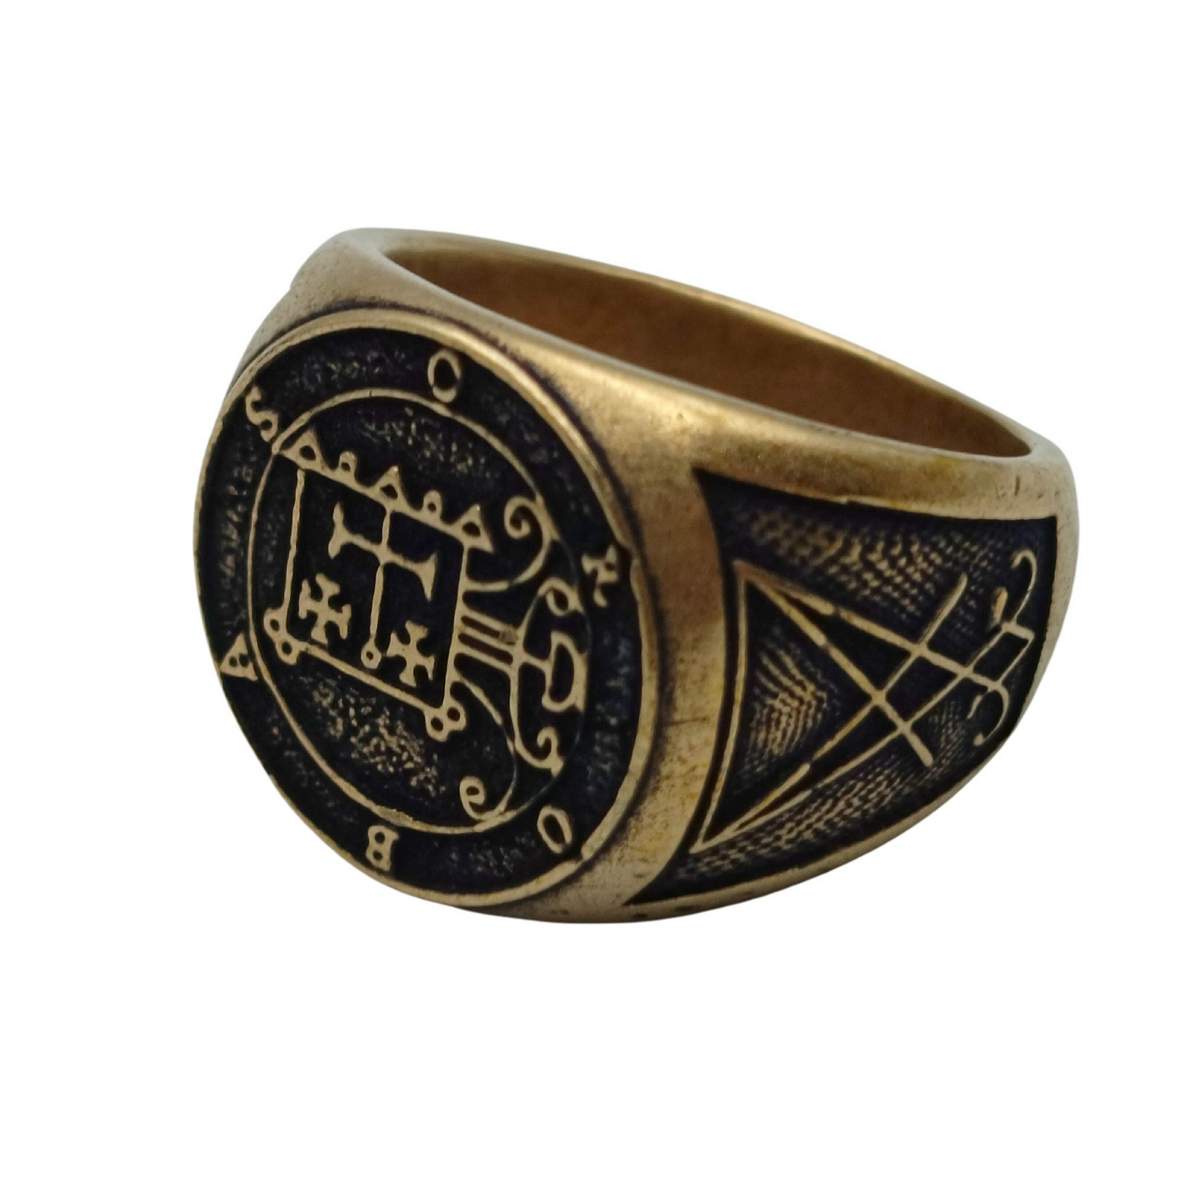 Orobas demon sigil ring from bronze   